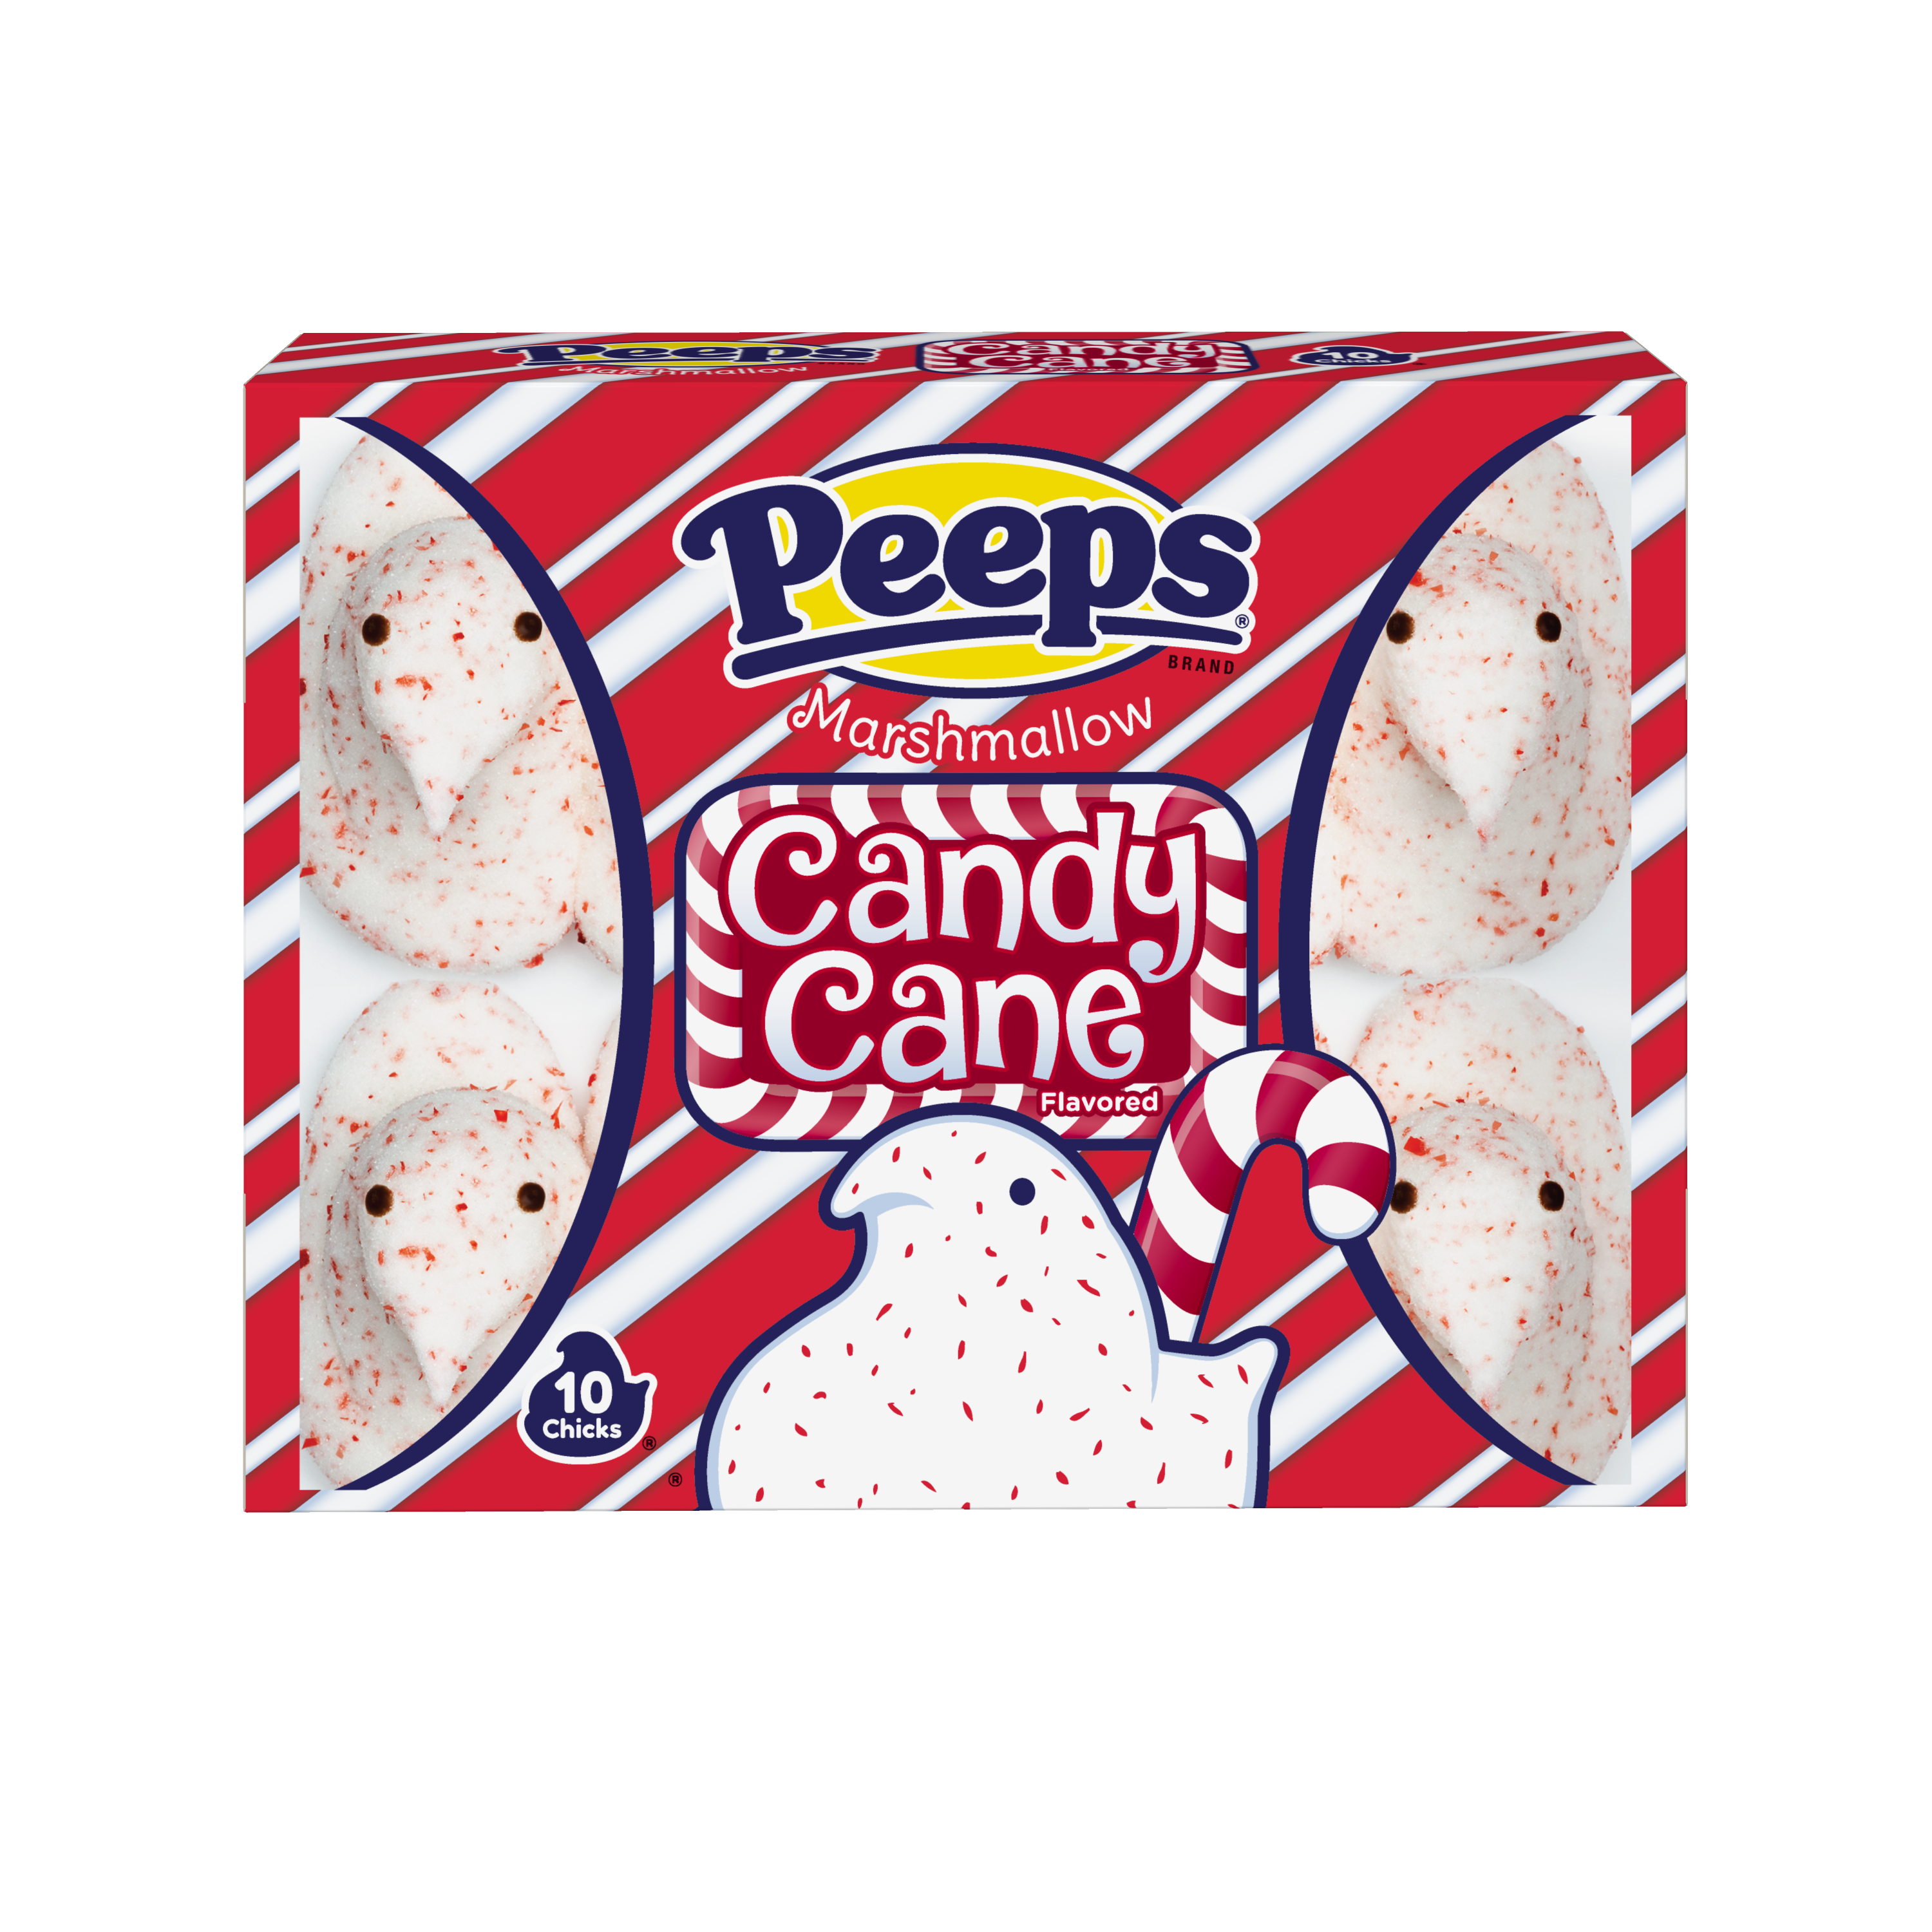 Peeps delights 3 count packages